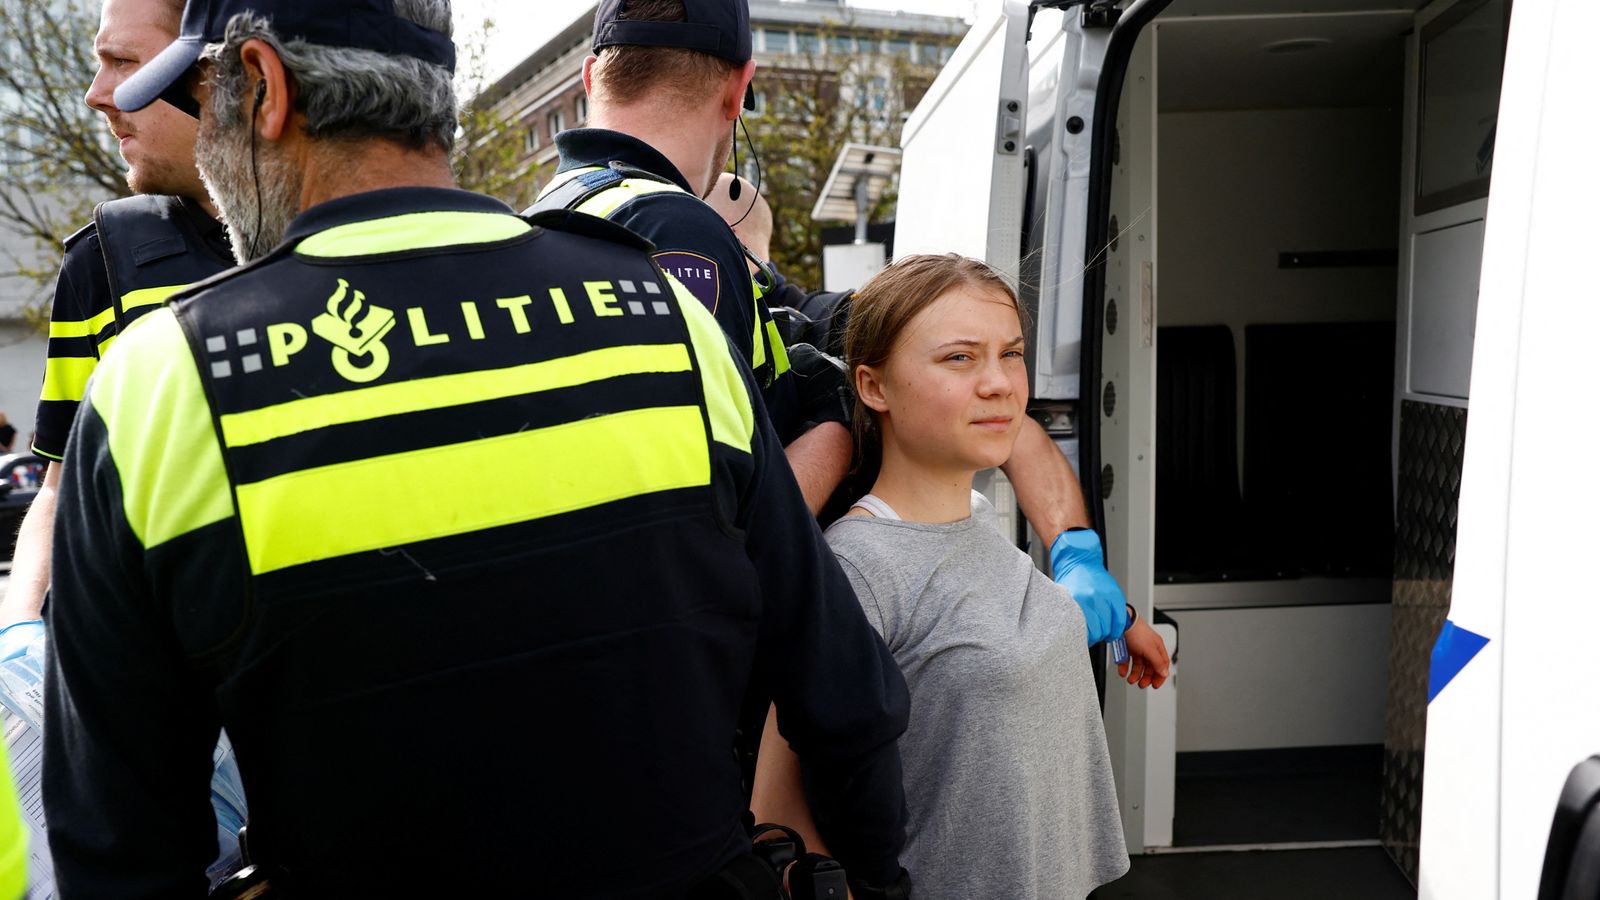 Climate activist Greta Thunberg detained by police in the Netherlands for protesting Dutch subsidies to fossil fuel industries